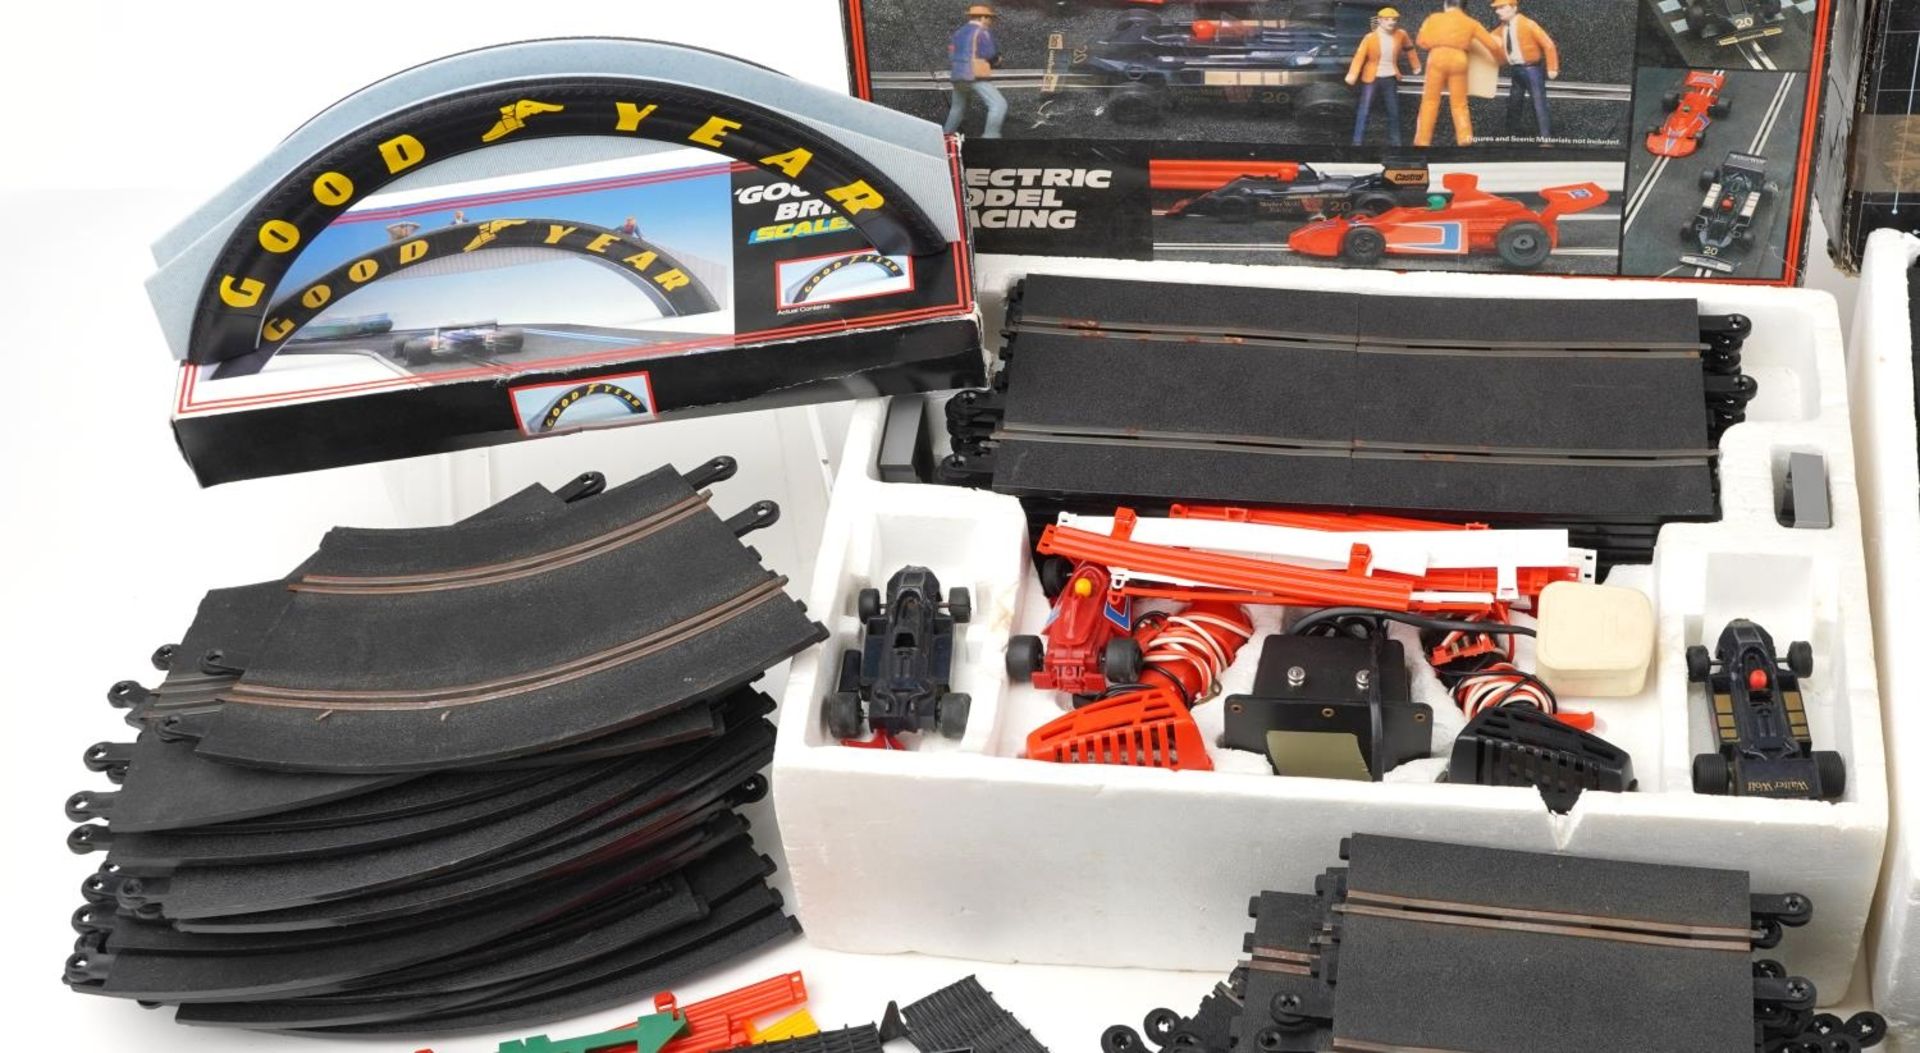 Vintage and later Scalextric model racing including Grand Prix with box - Bild 2 aus 5